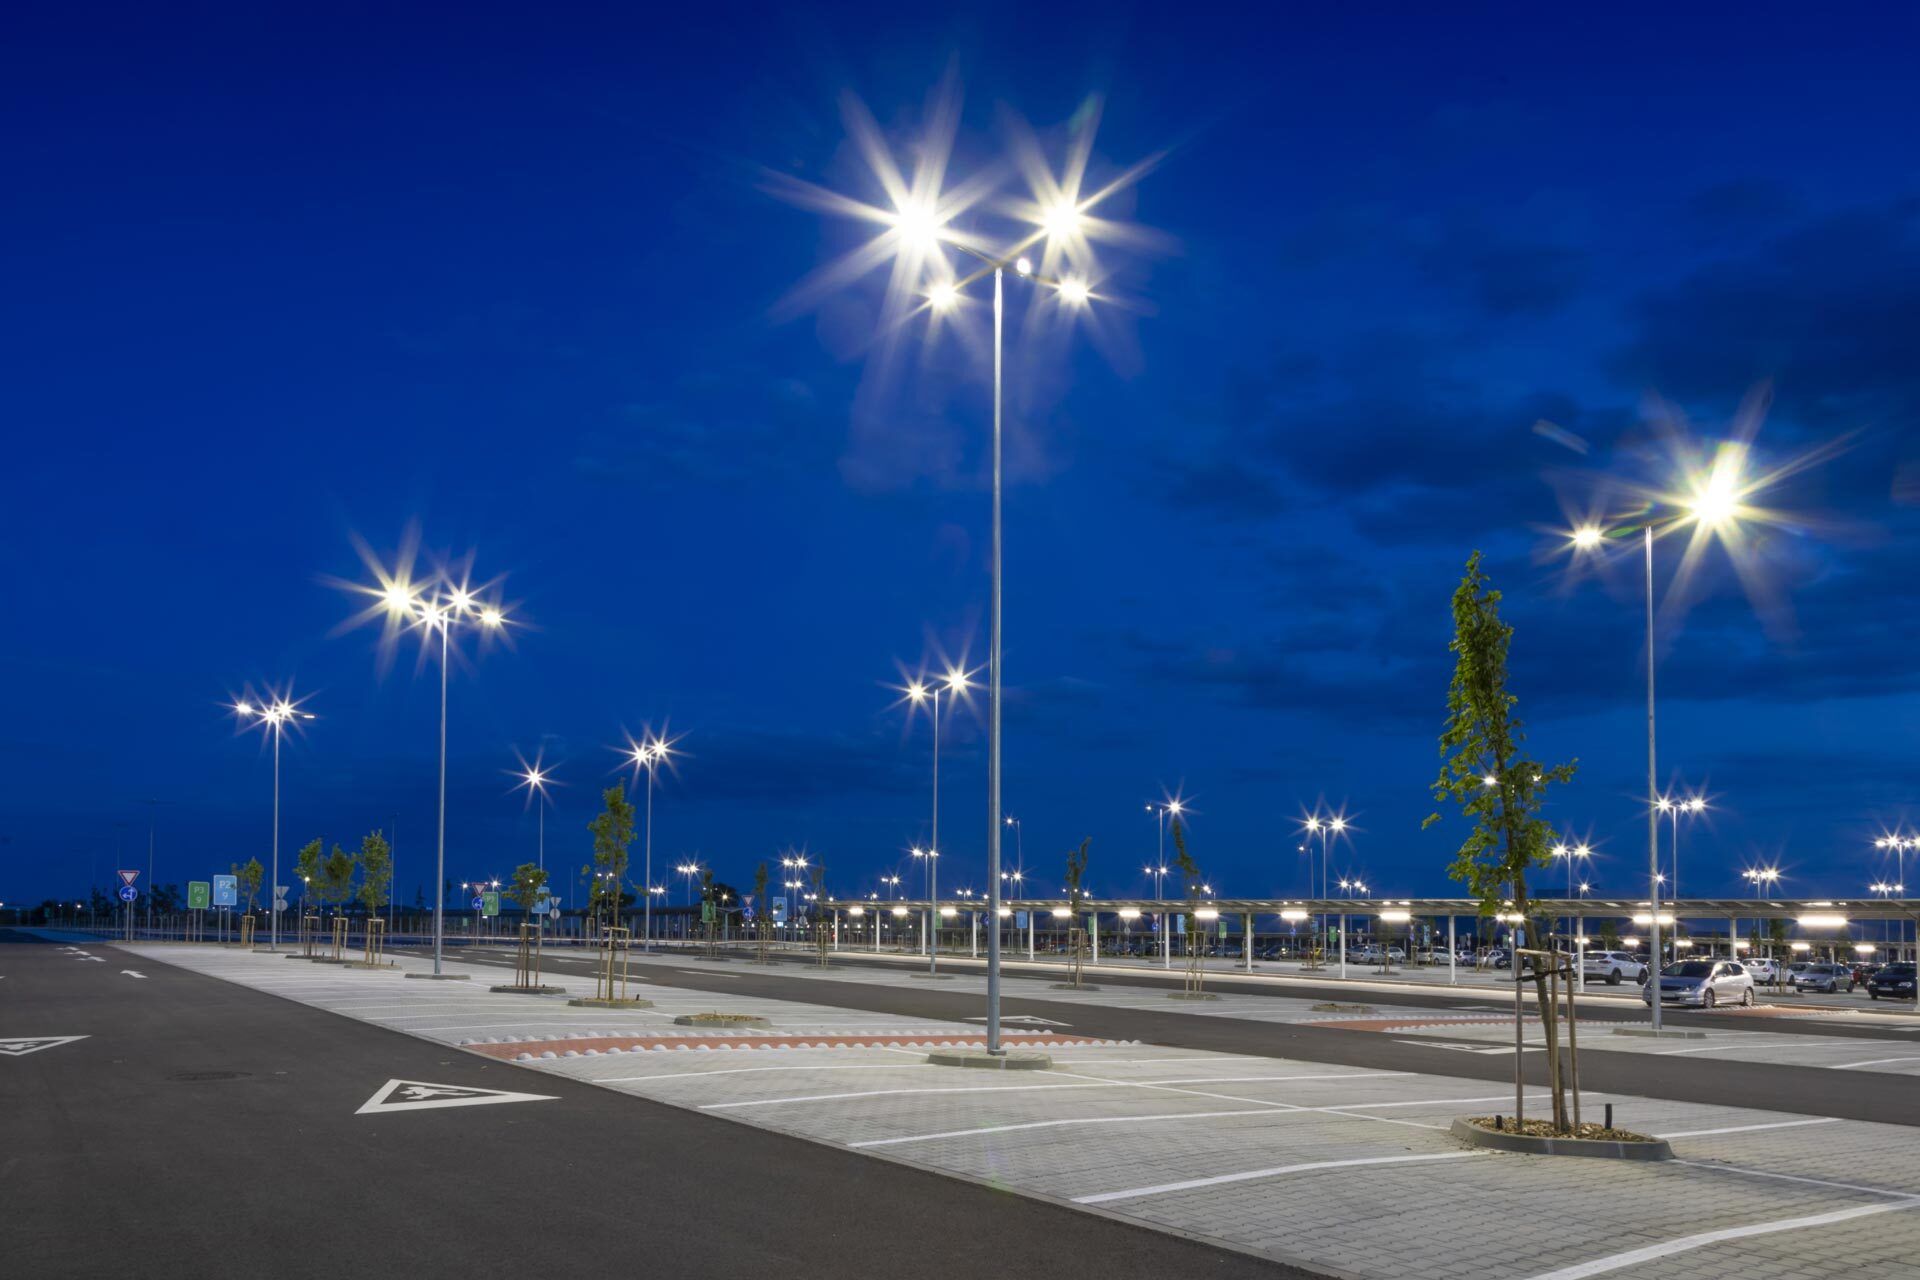 Big modern empty parking lot with bright LED street lights at night